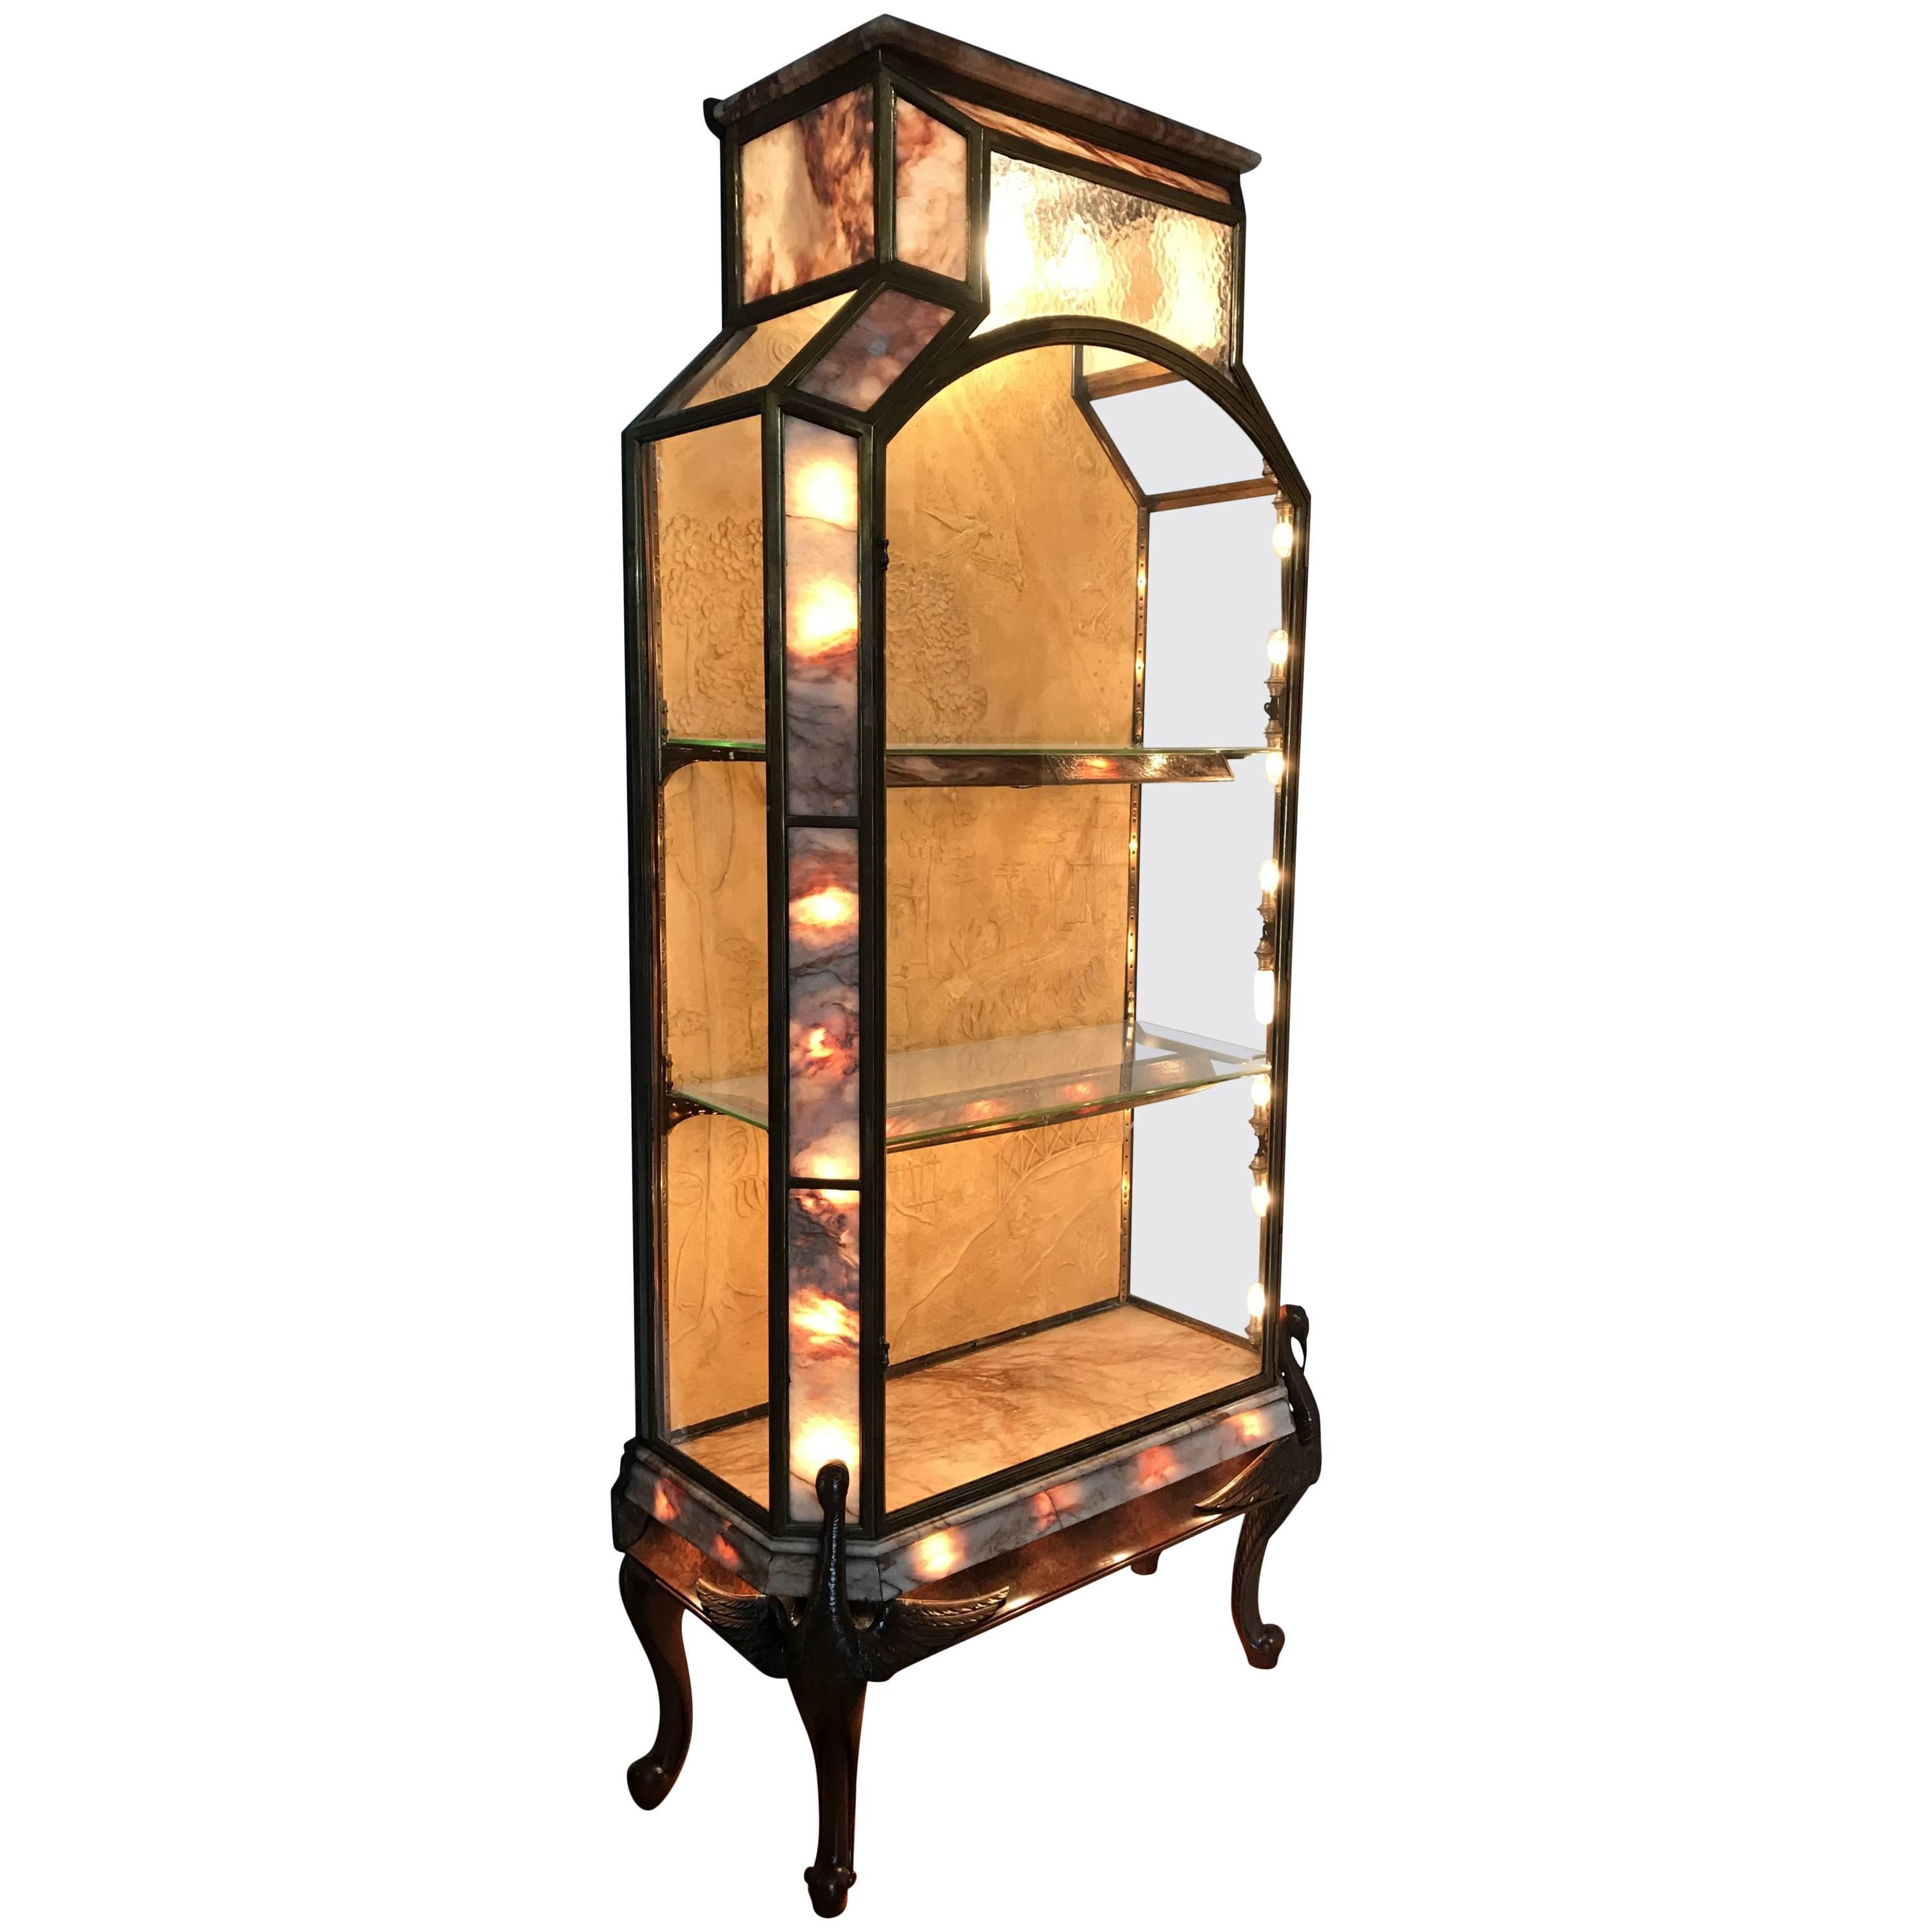 Stunning French Art Deco Bronze, Glass, Marble Carved Wood Vitrine-Display Case For Sale